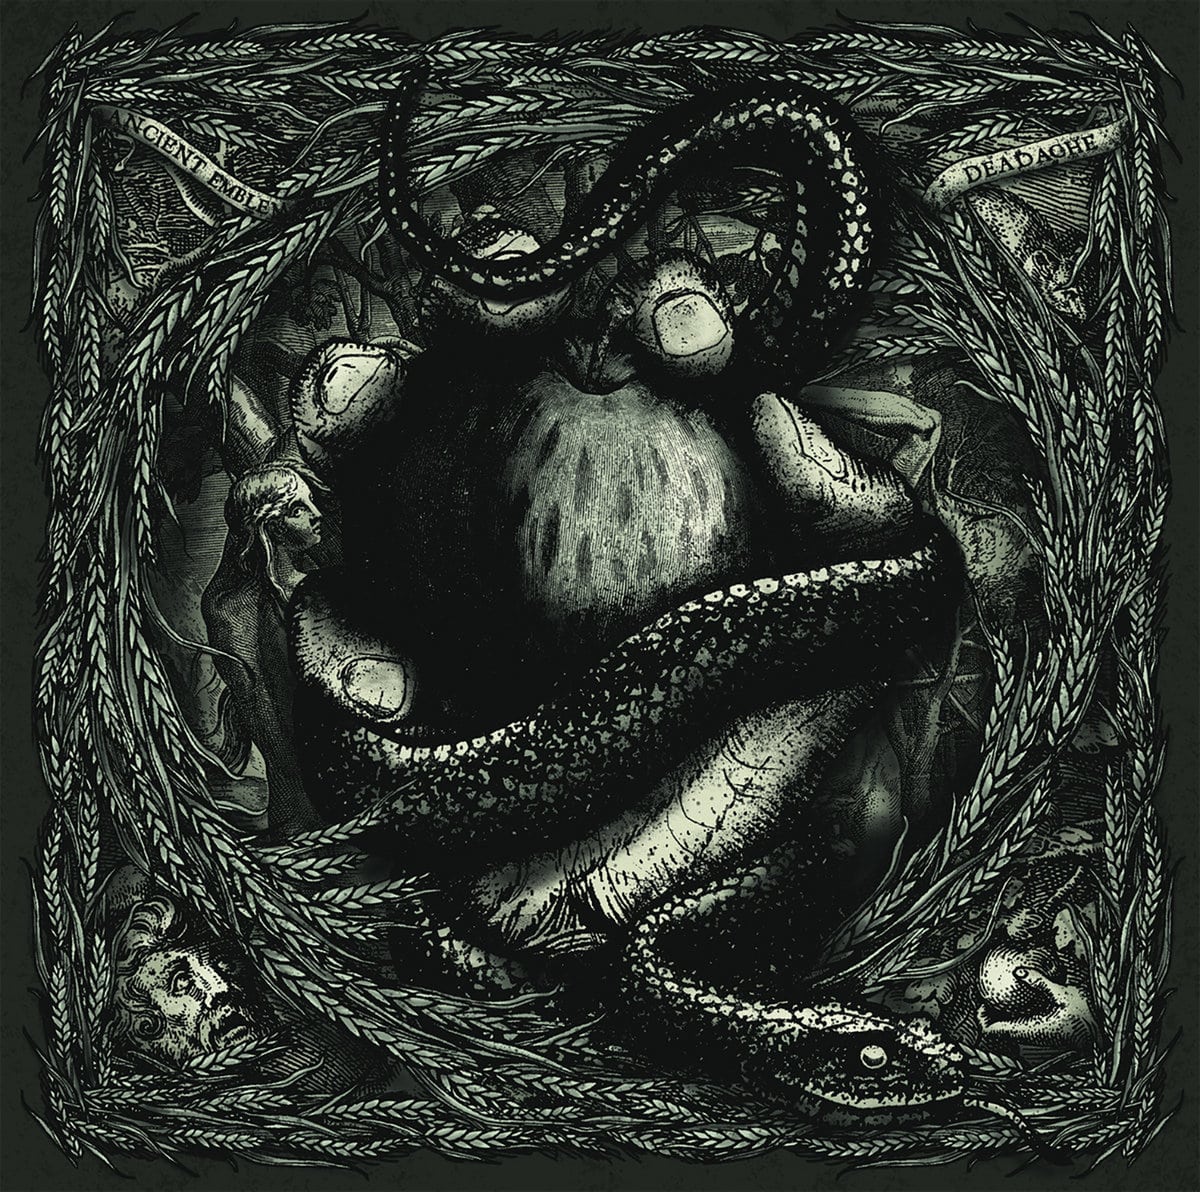 Ancient Emblem / Deadache – split LP great Split-LP by Ancient Emblem from the Basque Country and Deadache from Gothenborg, Sweden